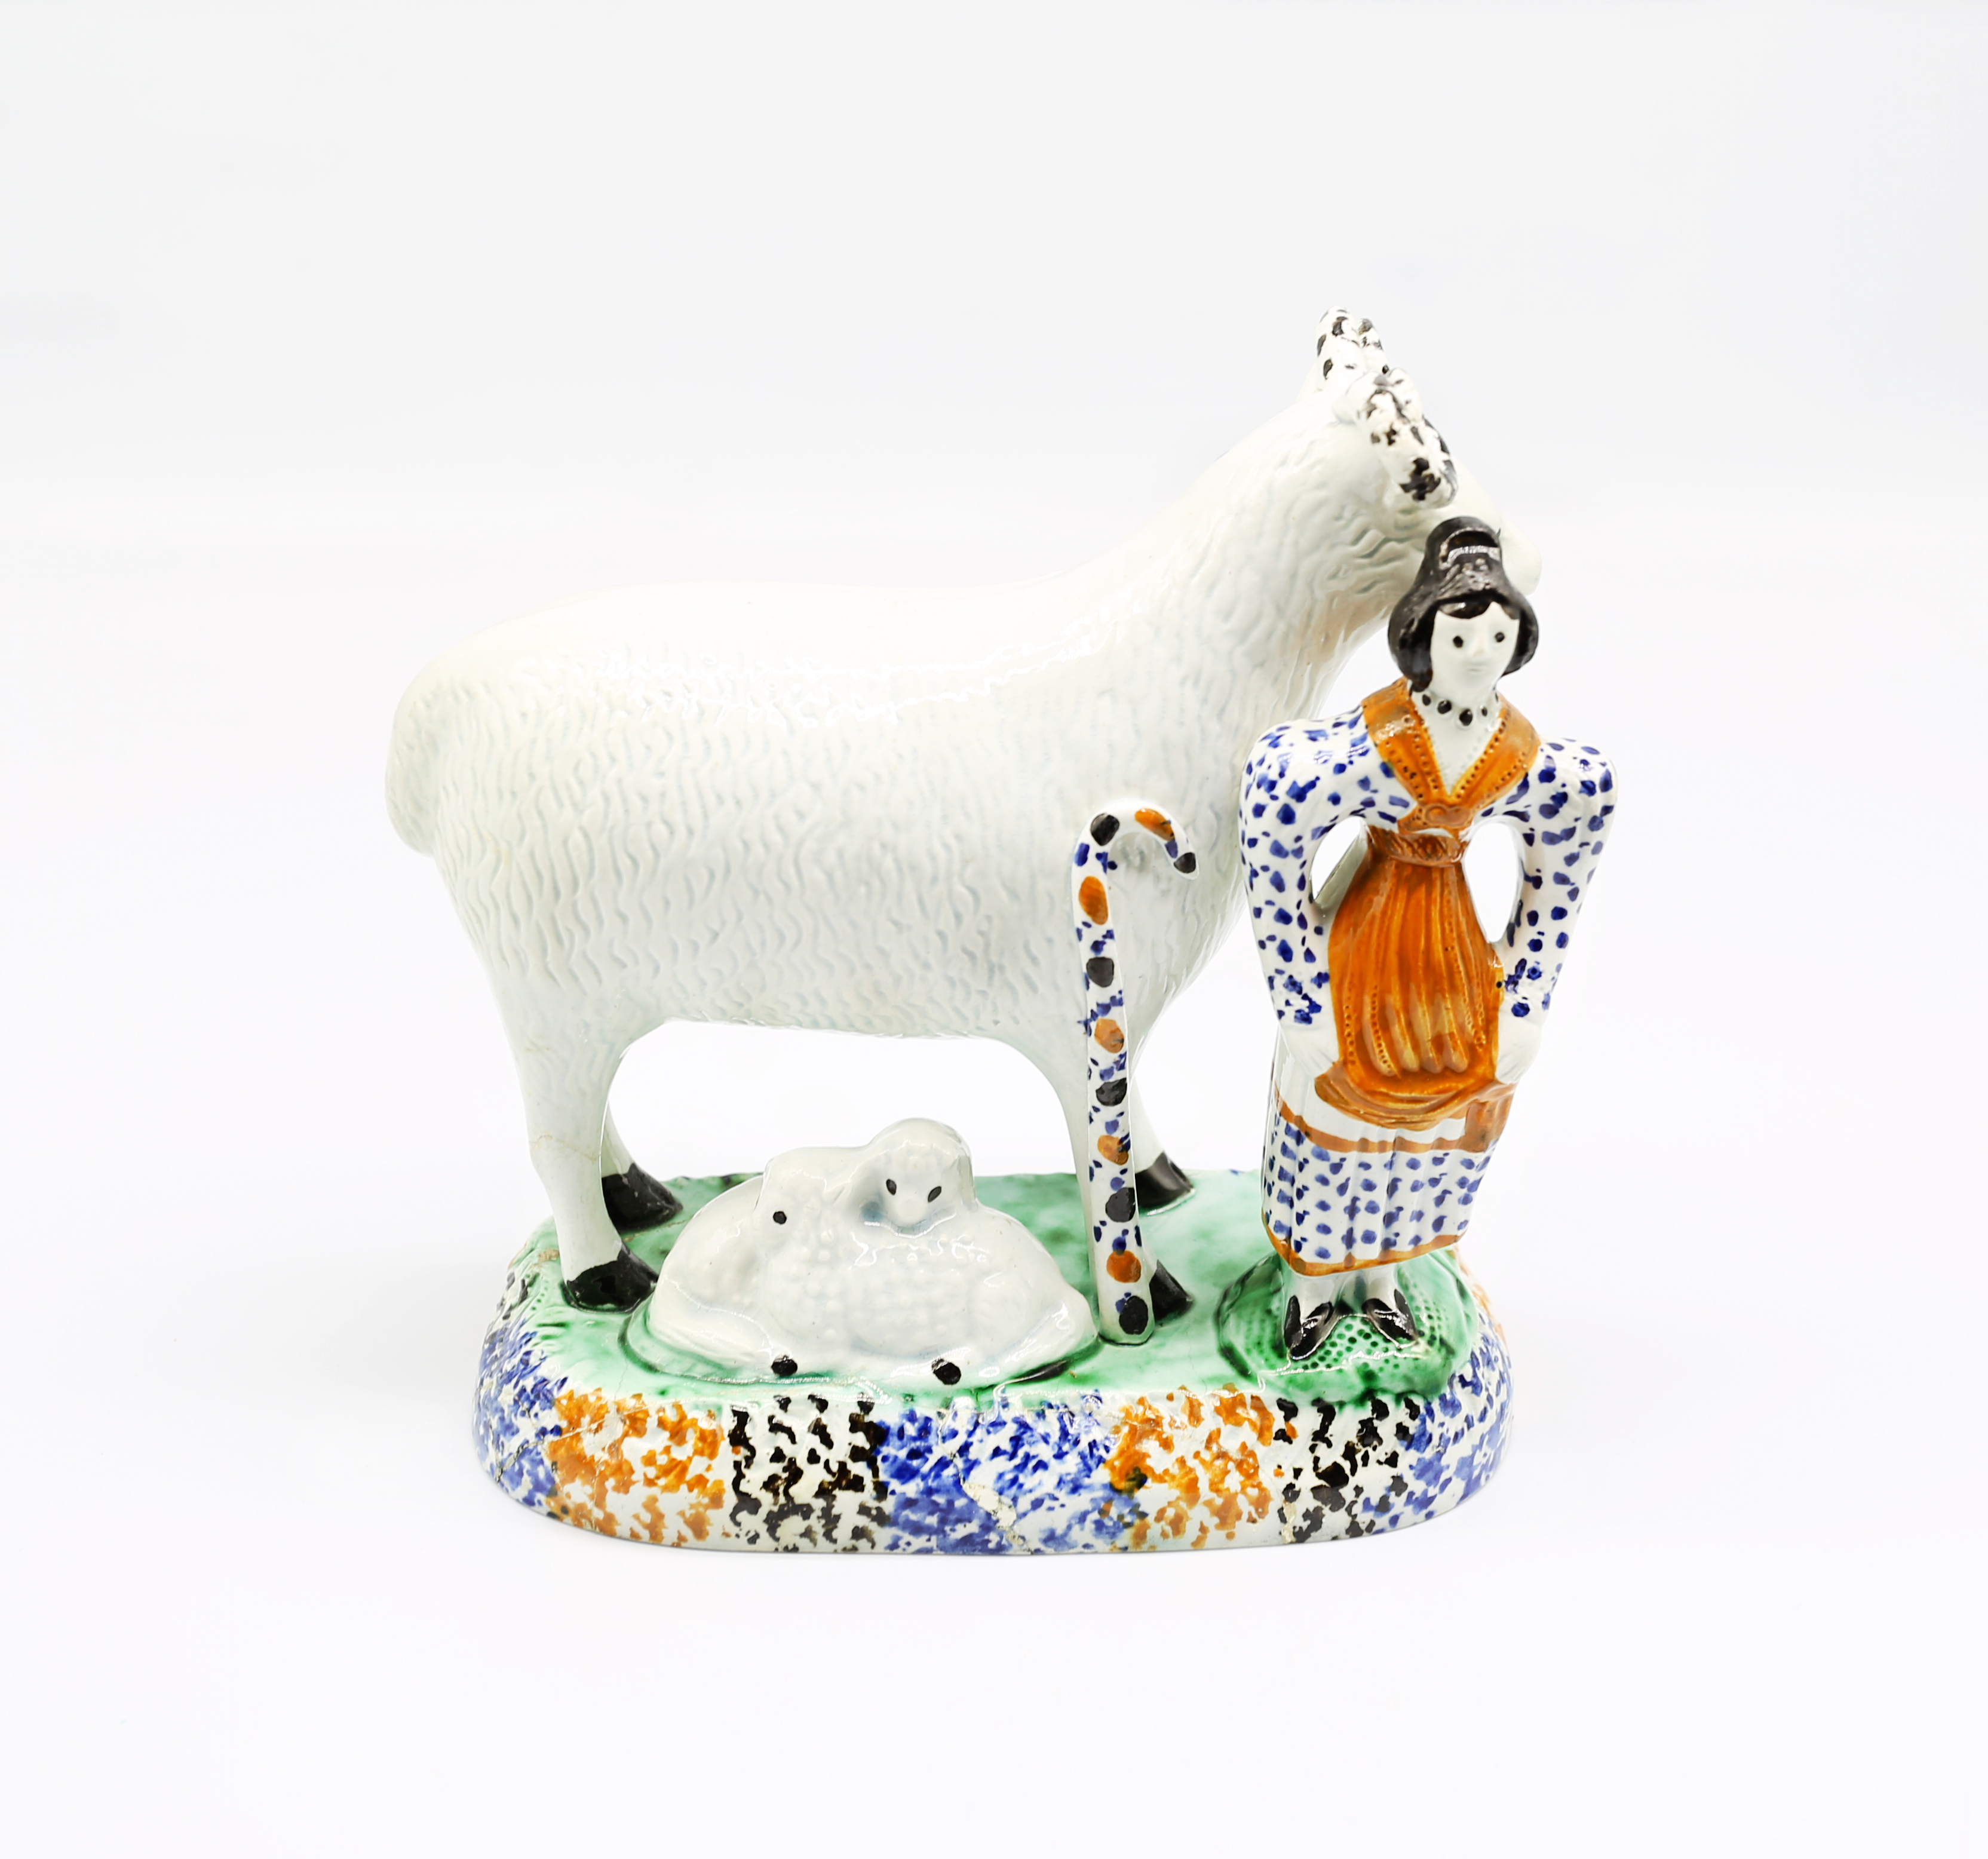 A Prattware model of a sheep and her lambs laying beneath her, with a shepherdess standing to the